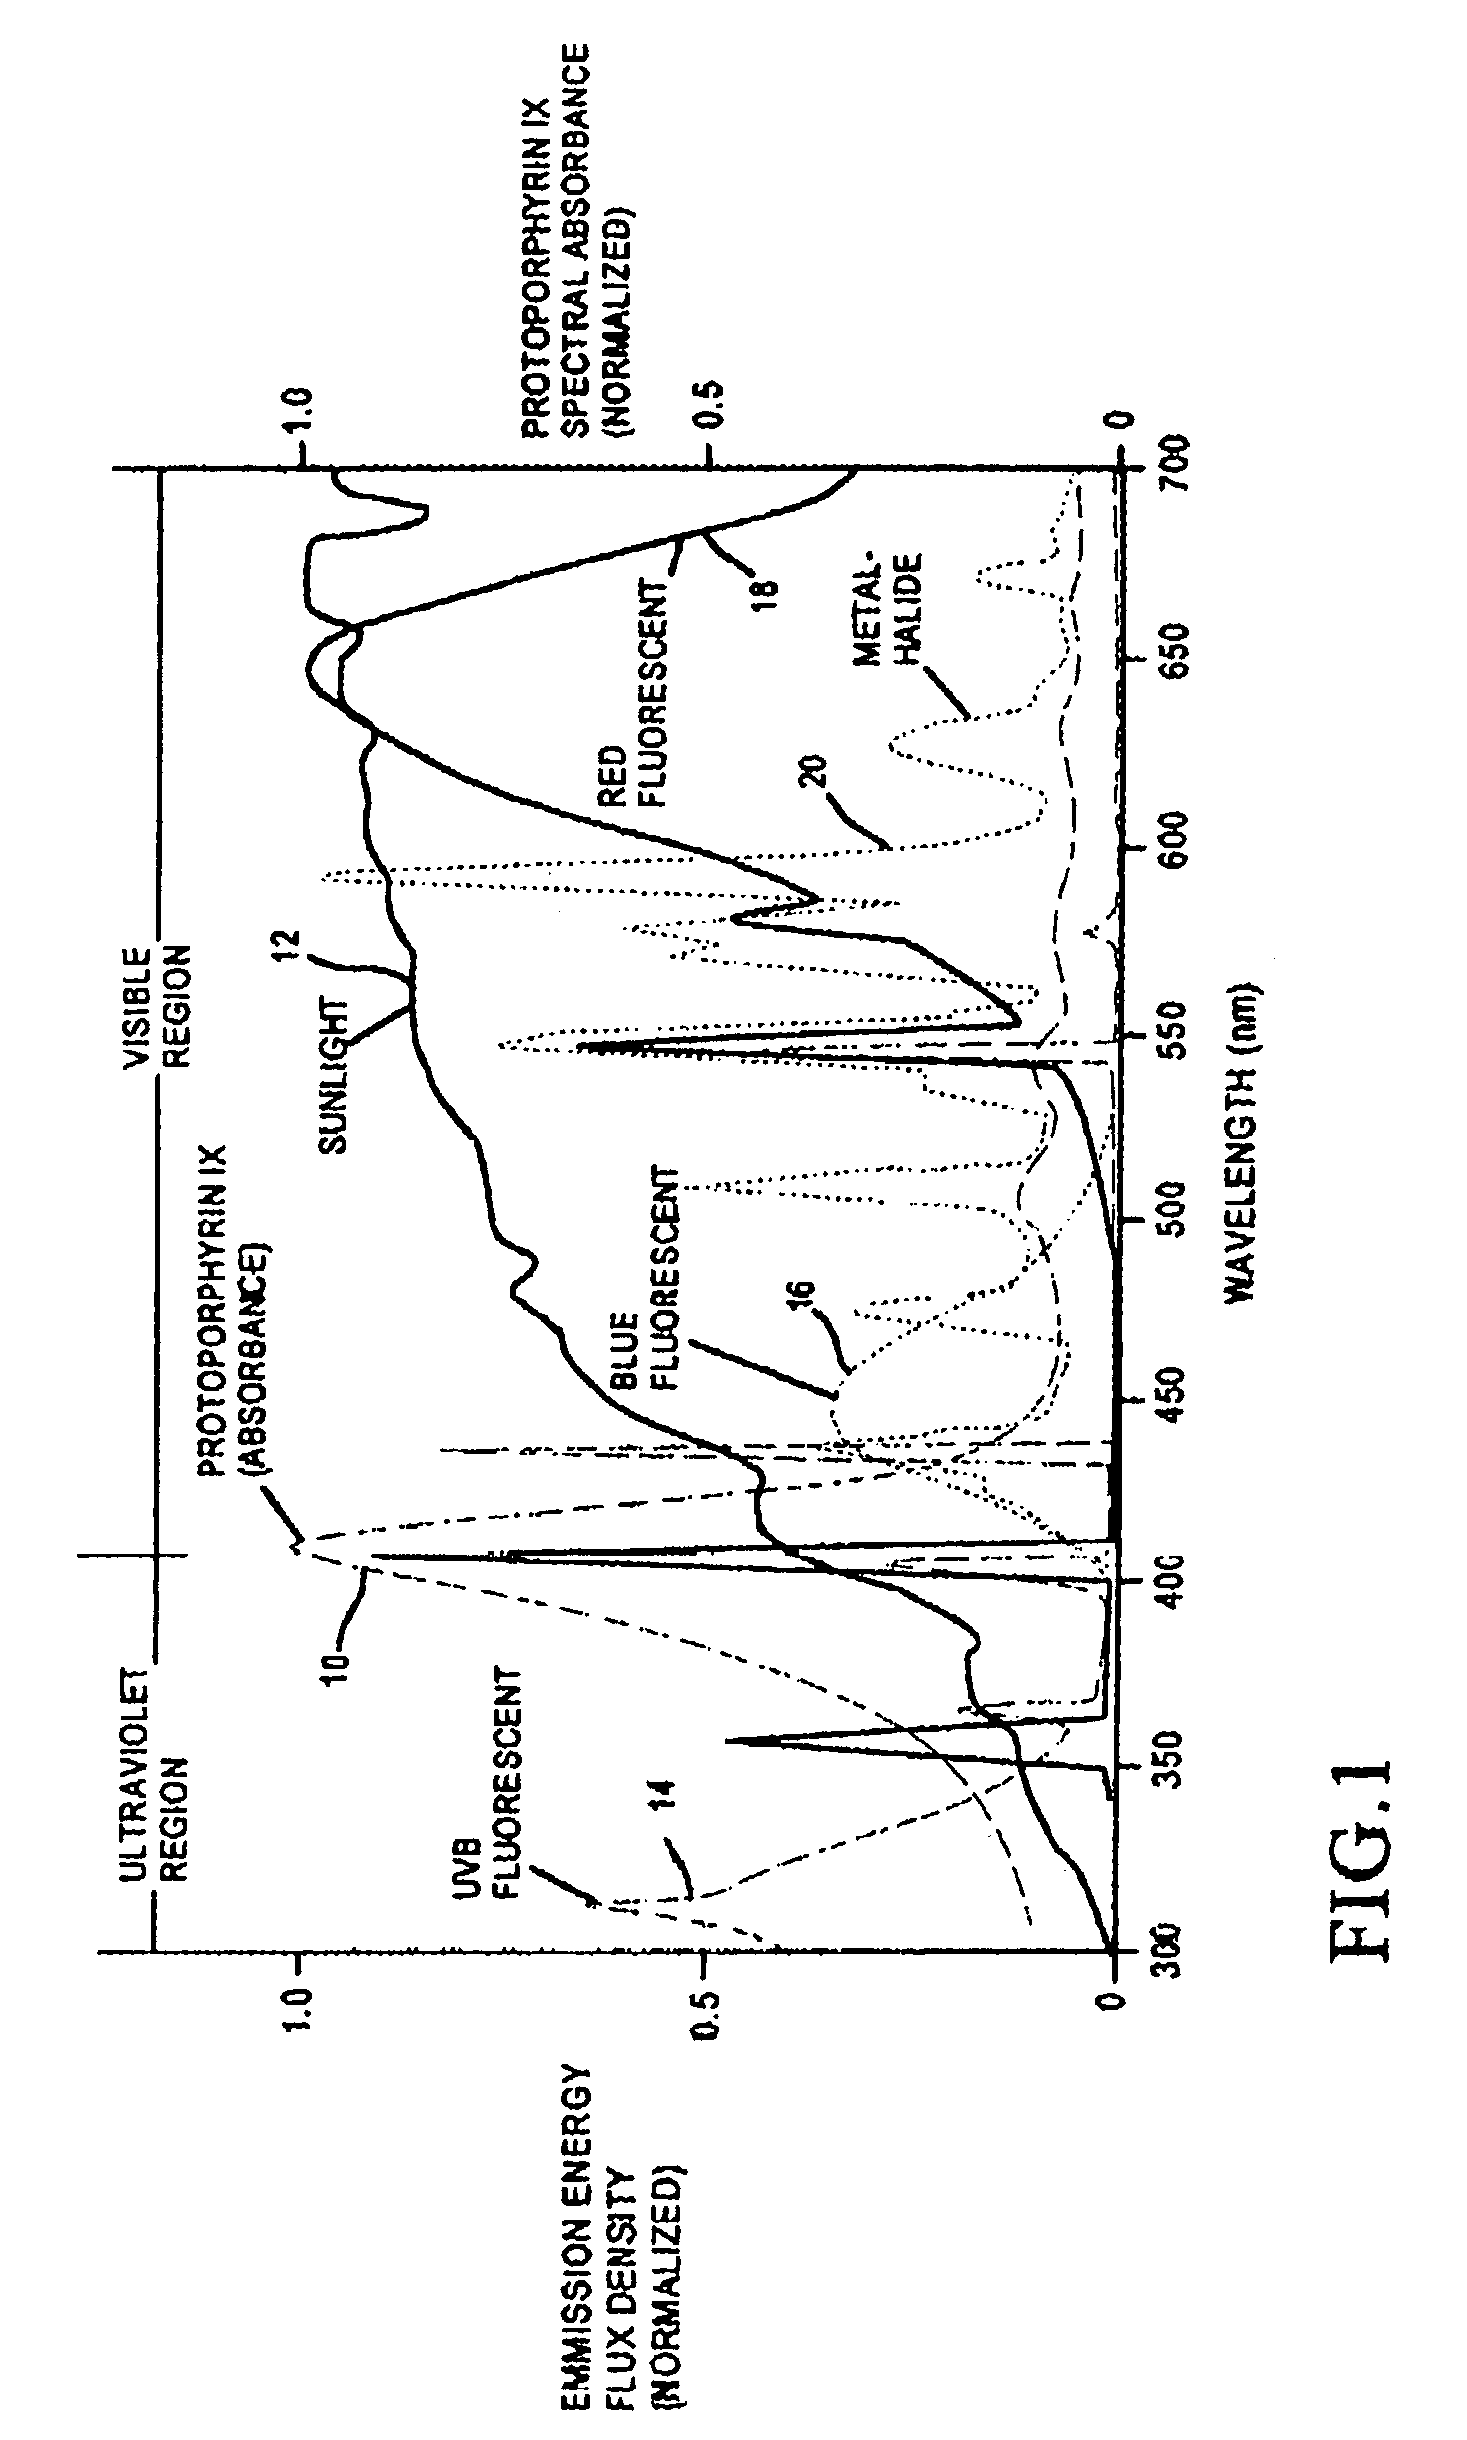 System for treatment of acne skin condition using a narrow band light source